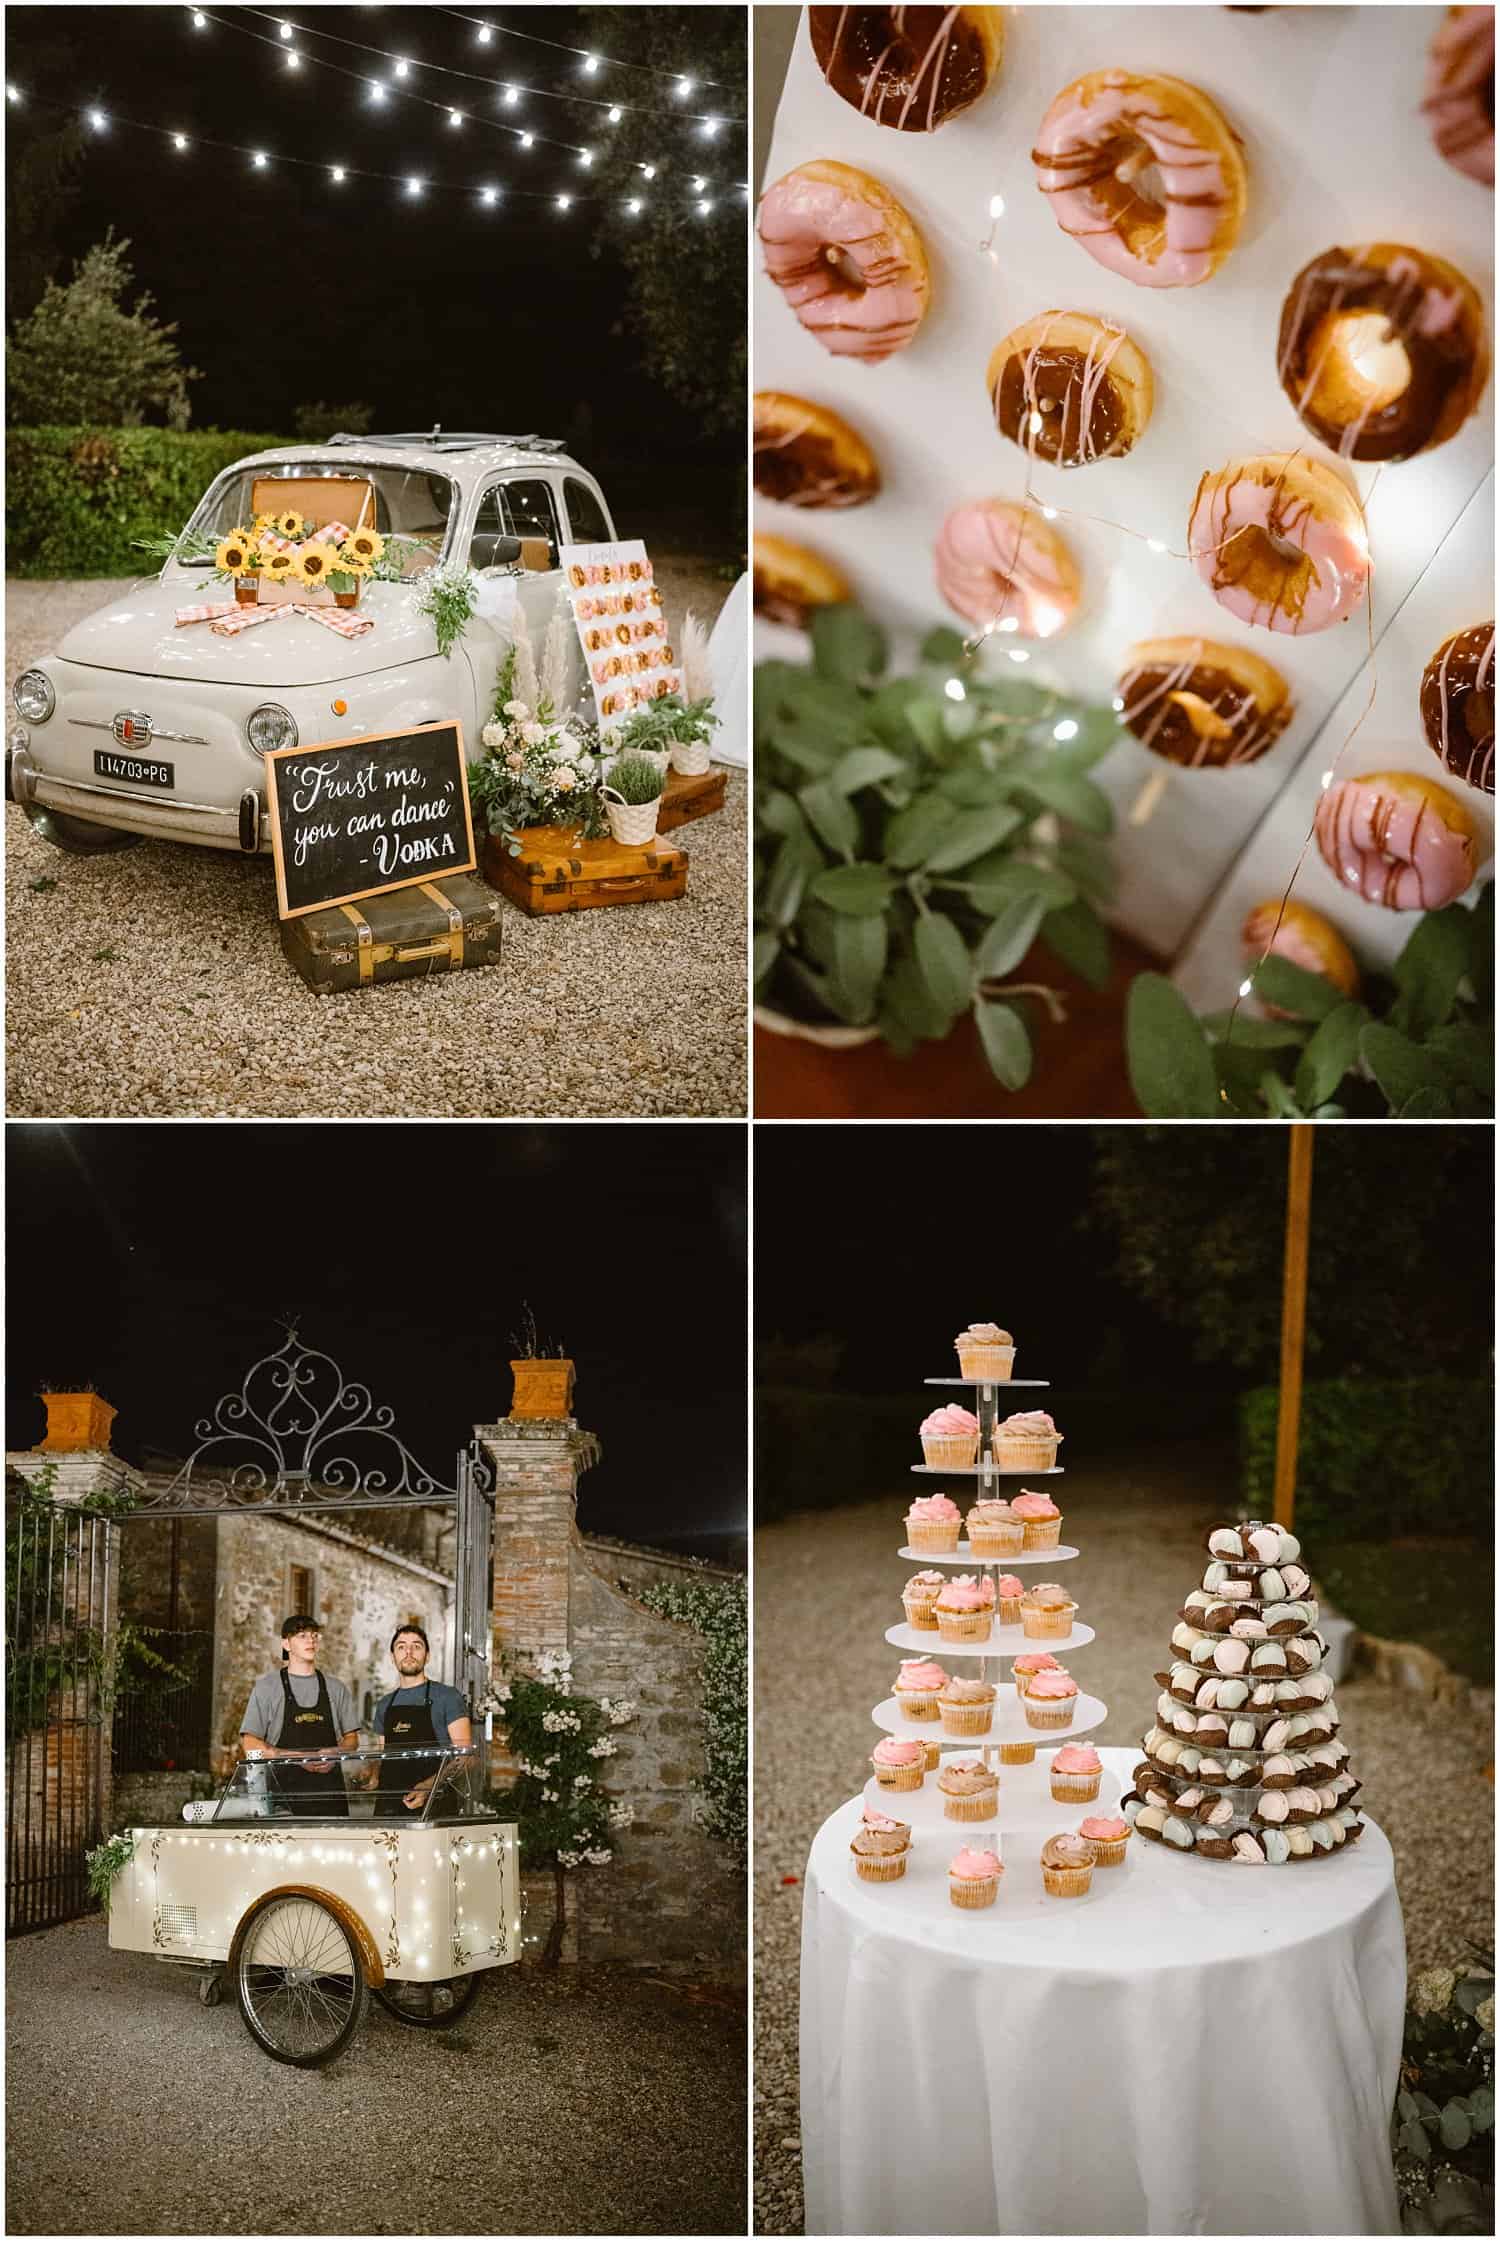 wedding desserts details from a wedding at Borgo Castelvecchi in Tuscany